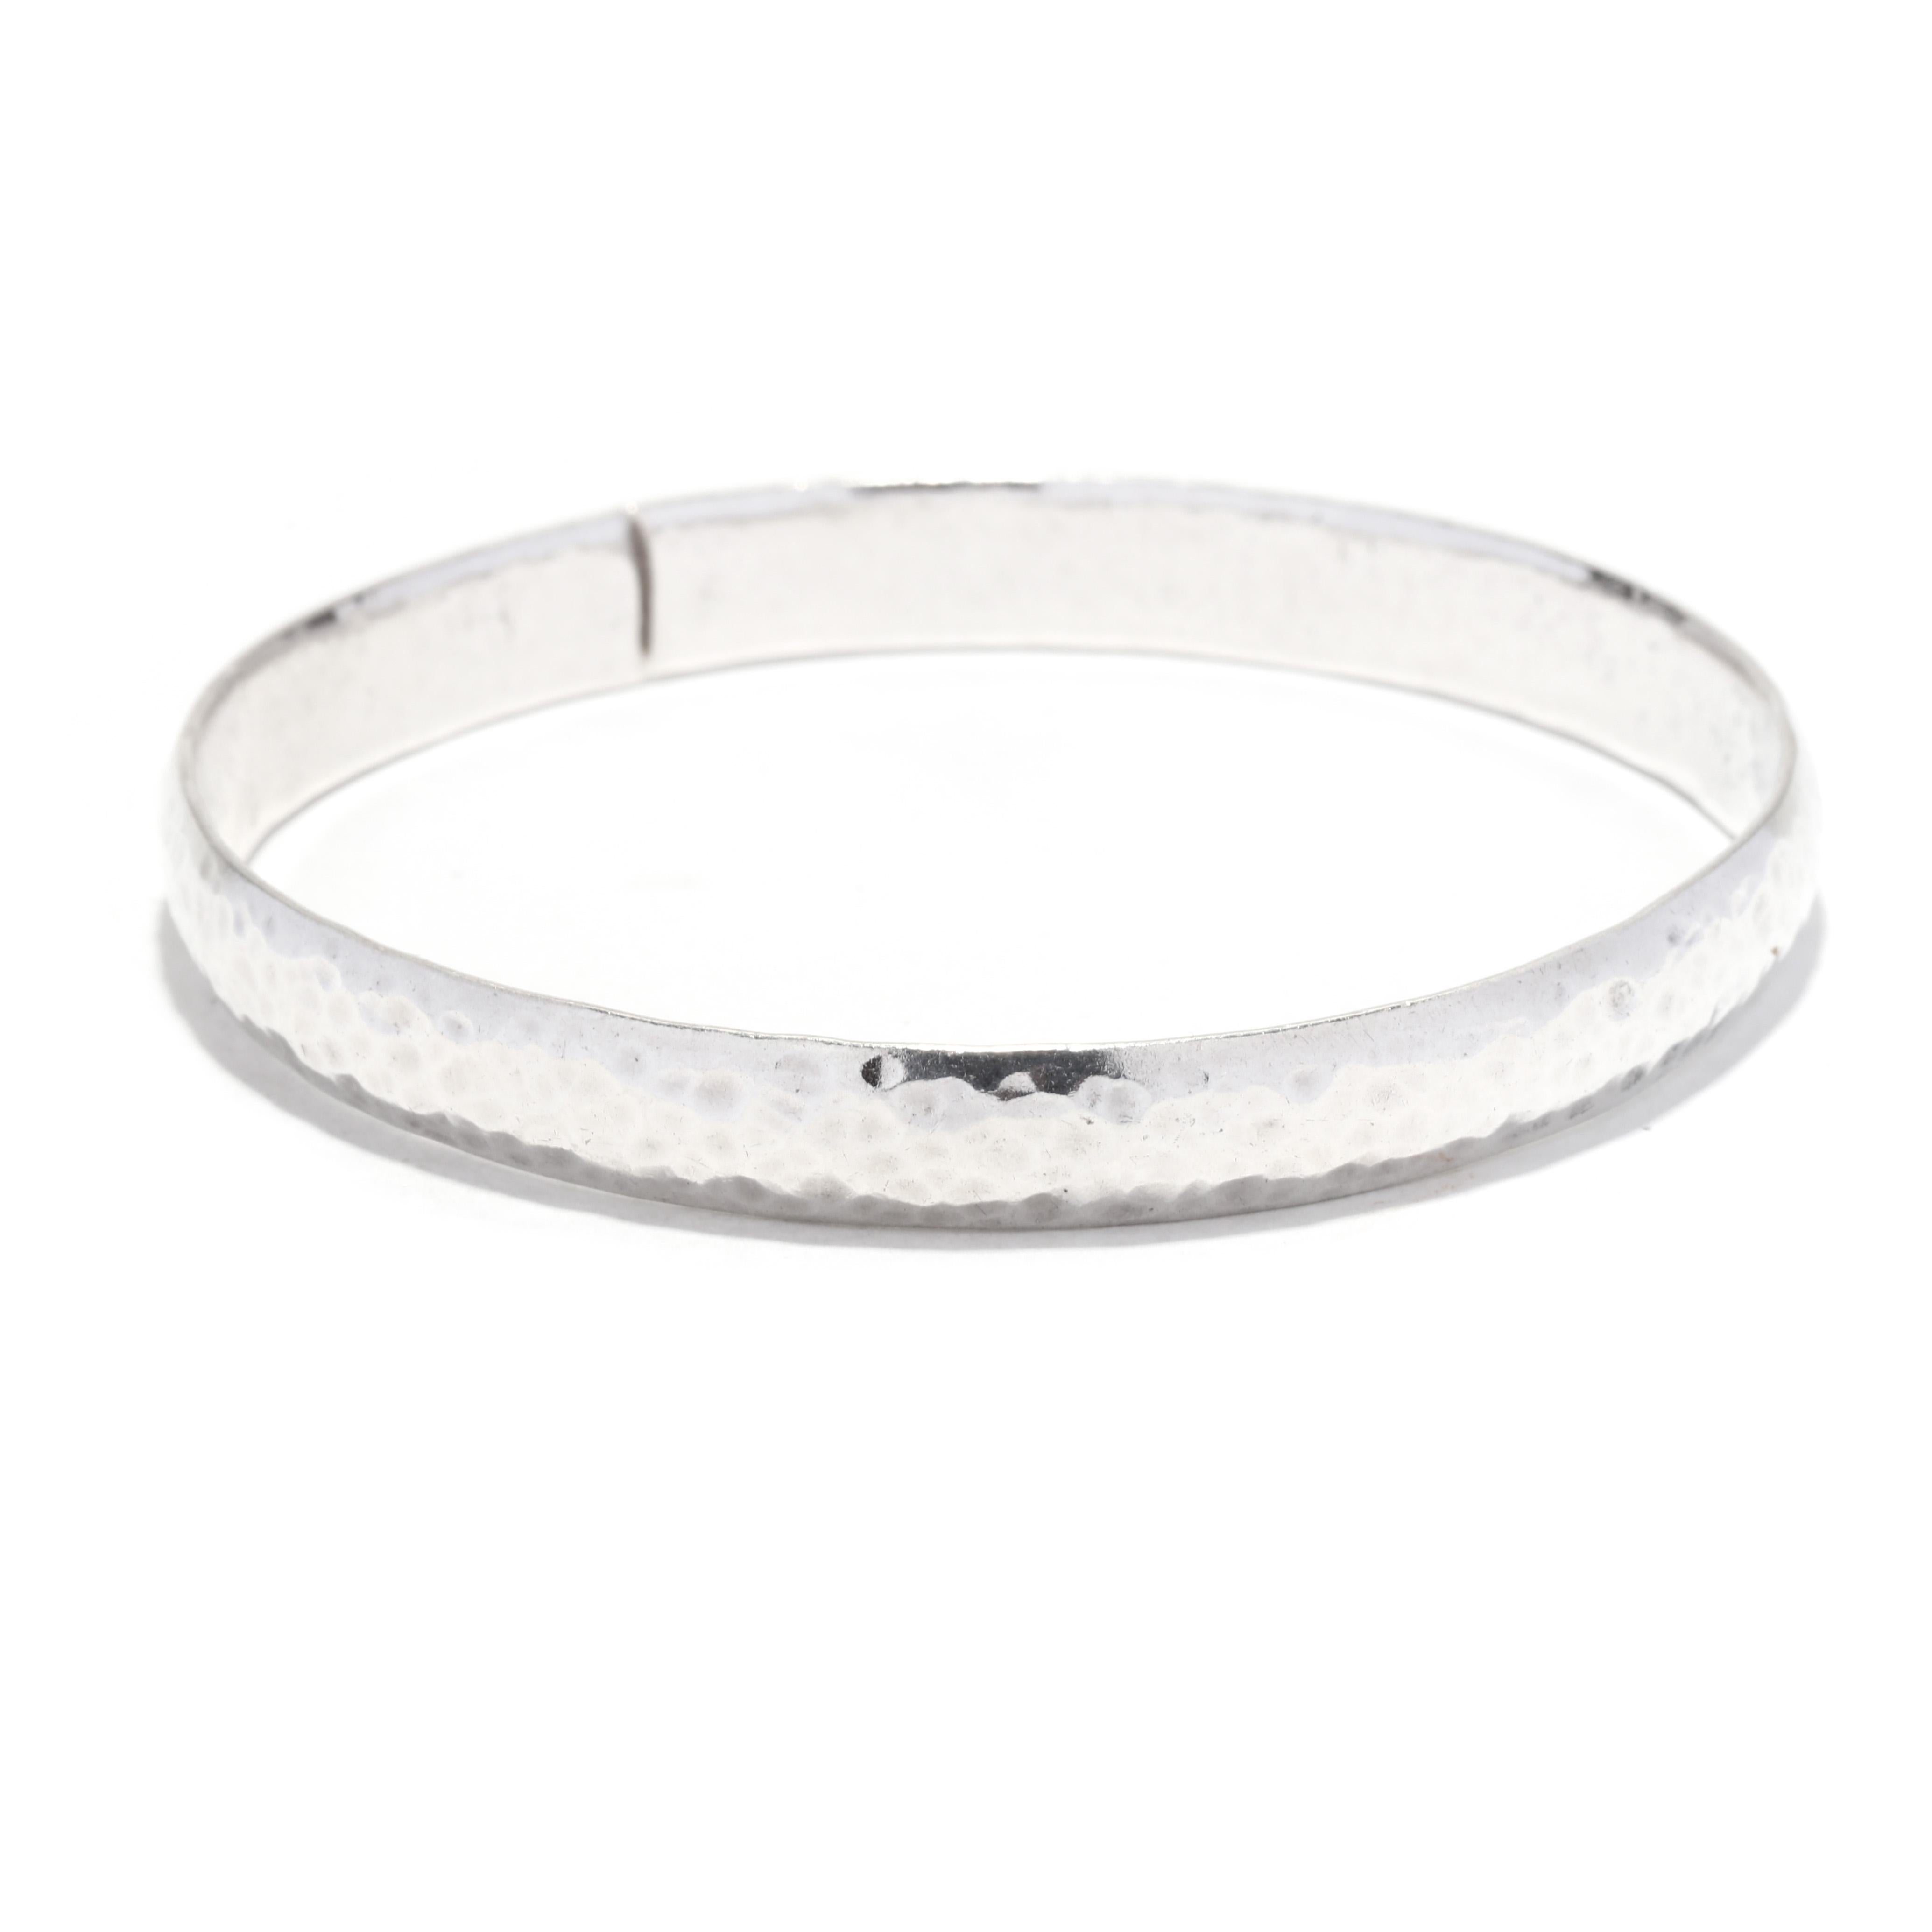 This hammered sterling silver bangle bracelet is a classic accessory that will never go out of style. Its sleek, 7.75-inch design is perfect for everyday wear and adds a sophisticated touch to any outfit. Crafted from high-quality sterling silver,